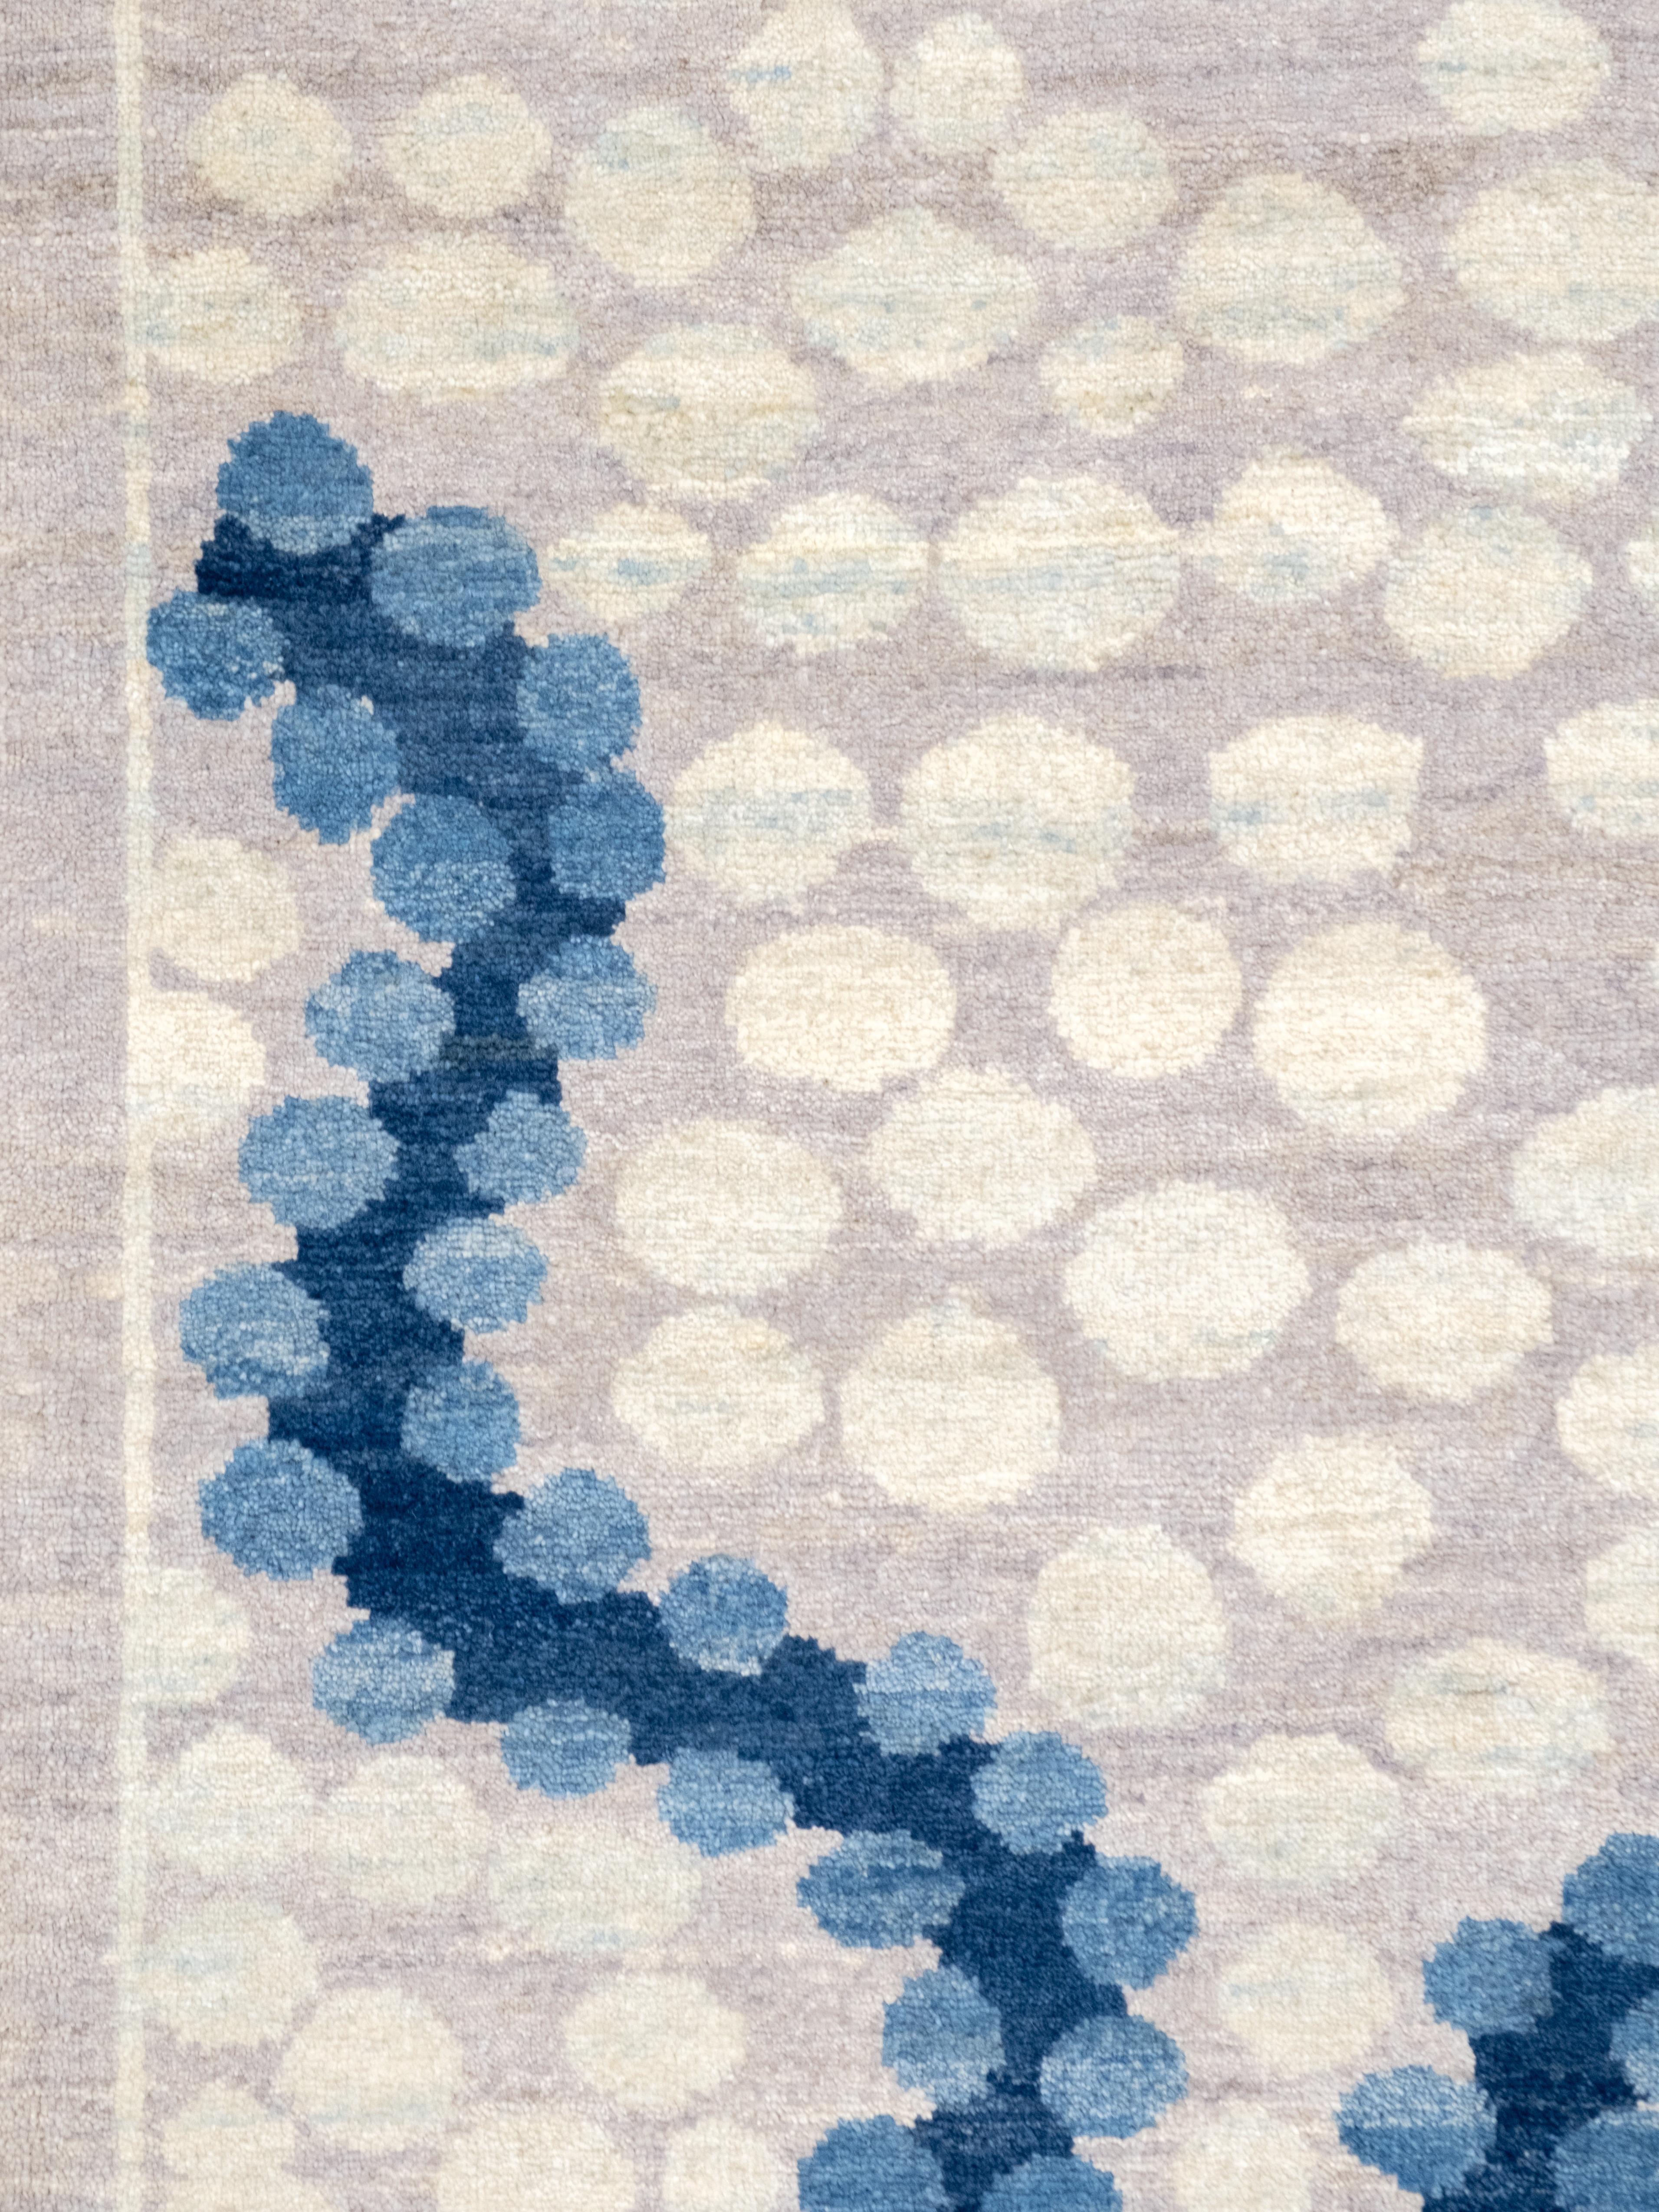 Blue and Cream Wool Contemporary Persian Carpet, Hand-Knotted, 8' x 10' For Sale 1